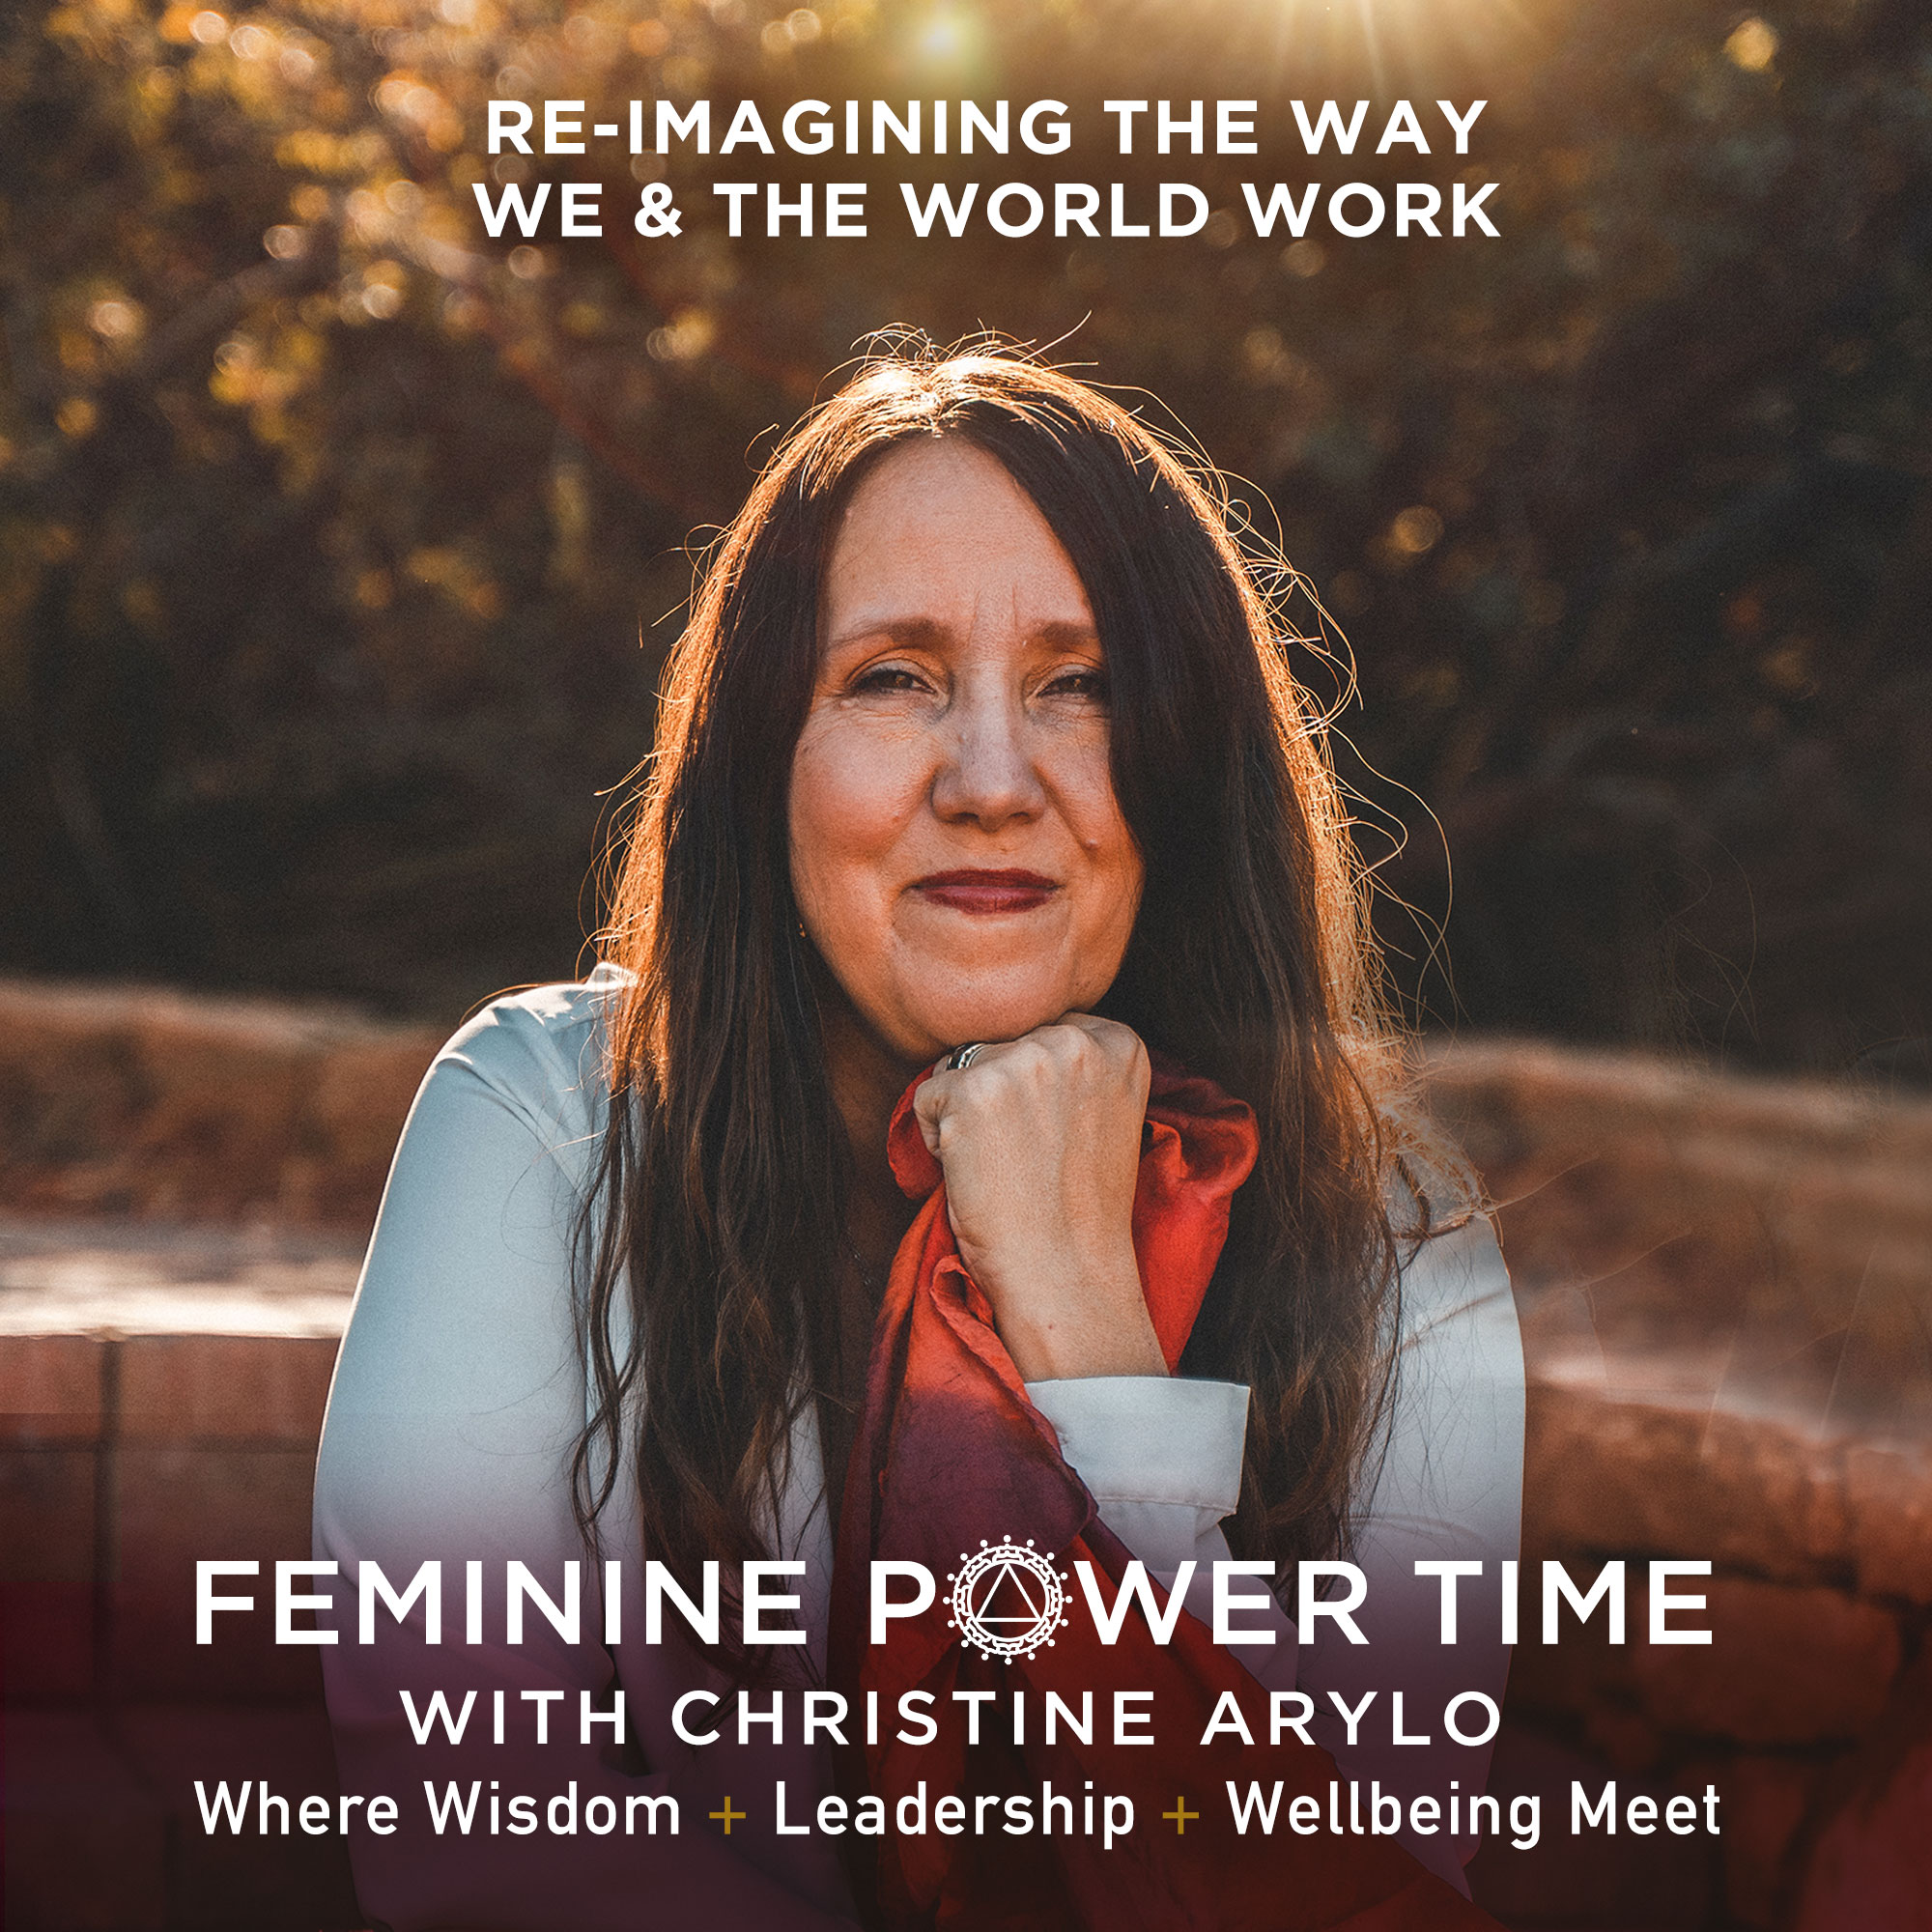 feminine power time podcast: reimagining the way we & the world work